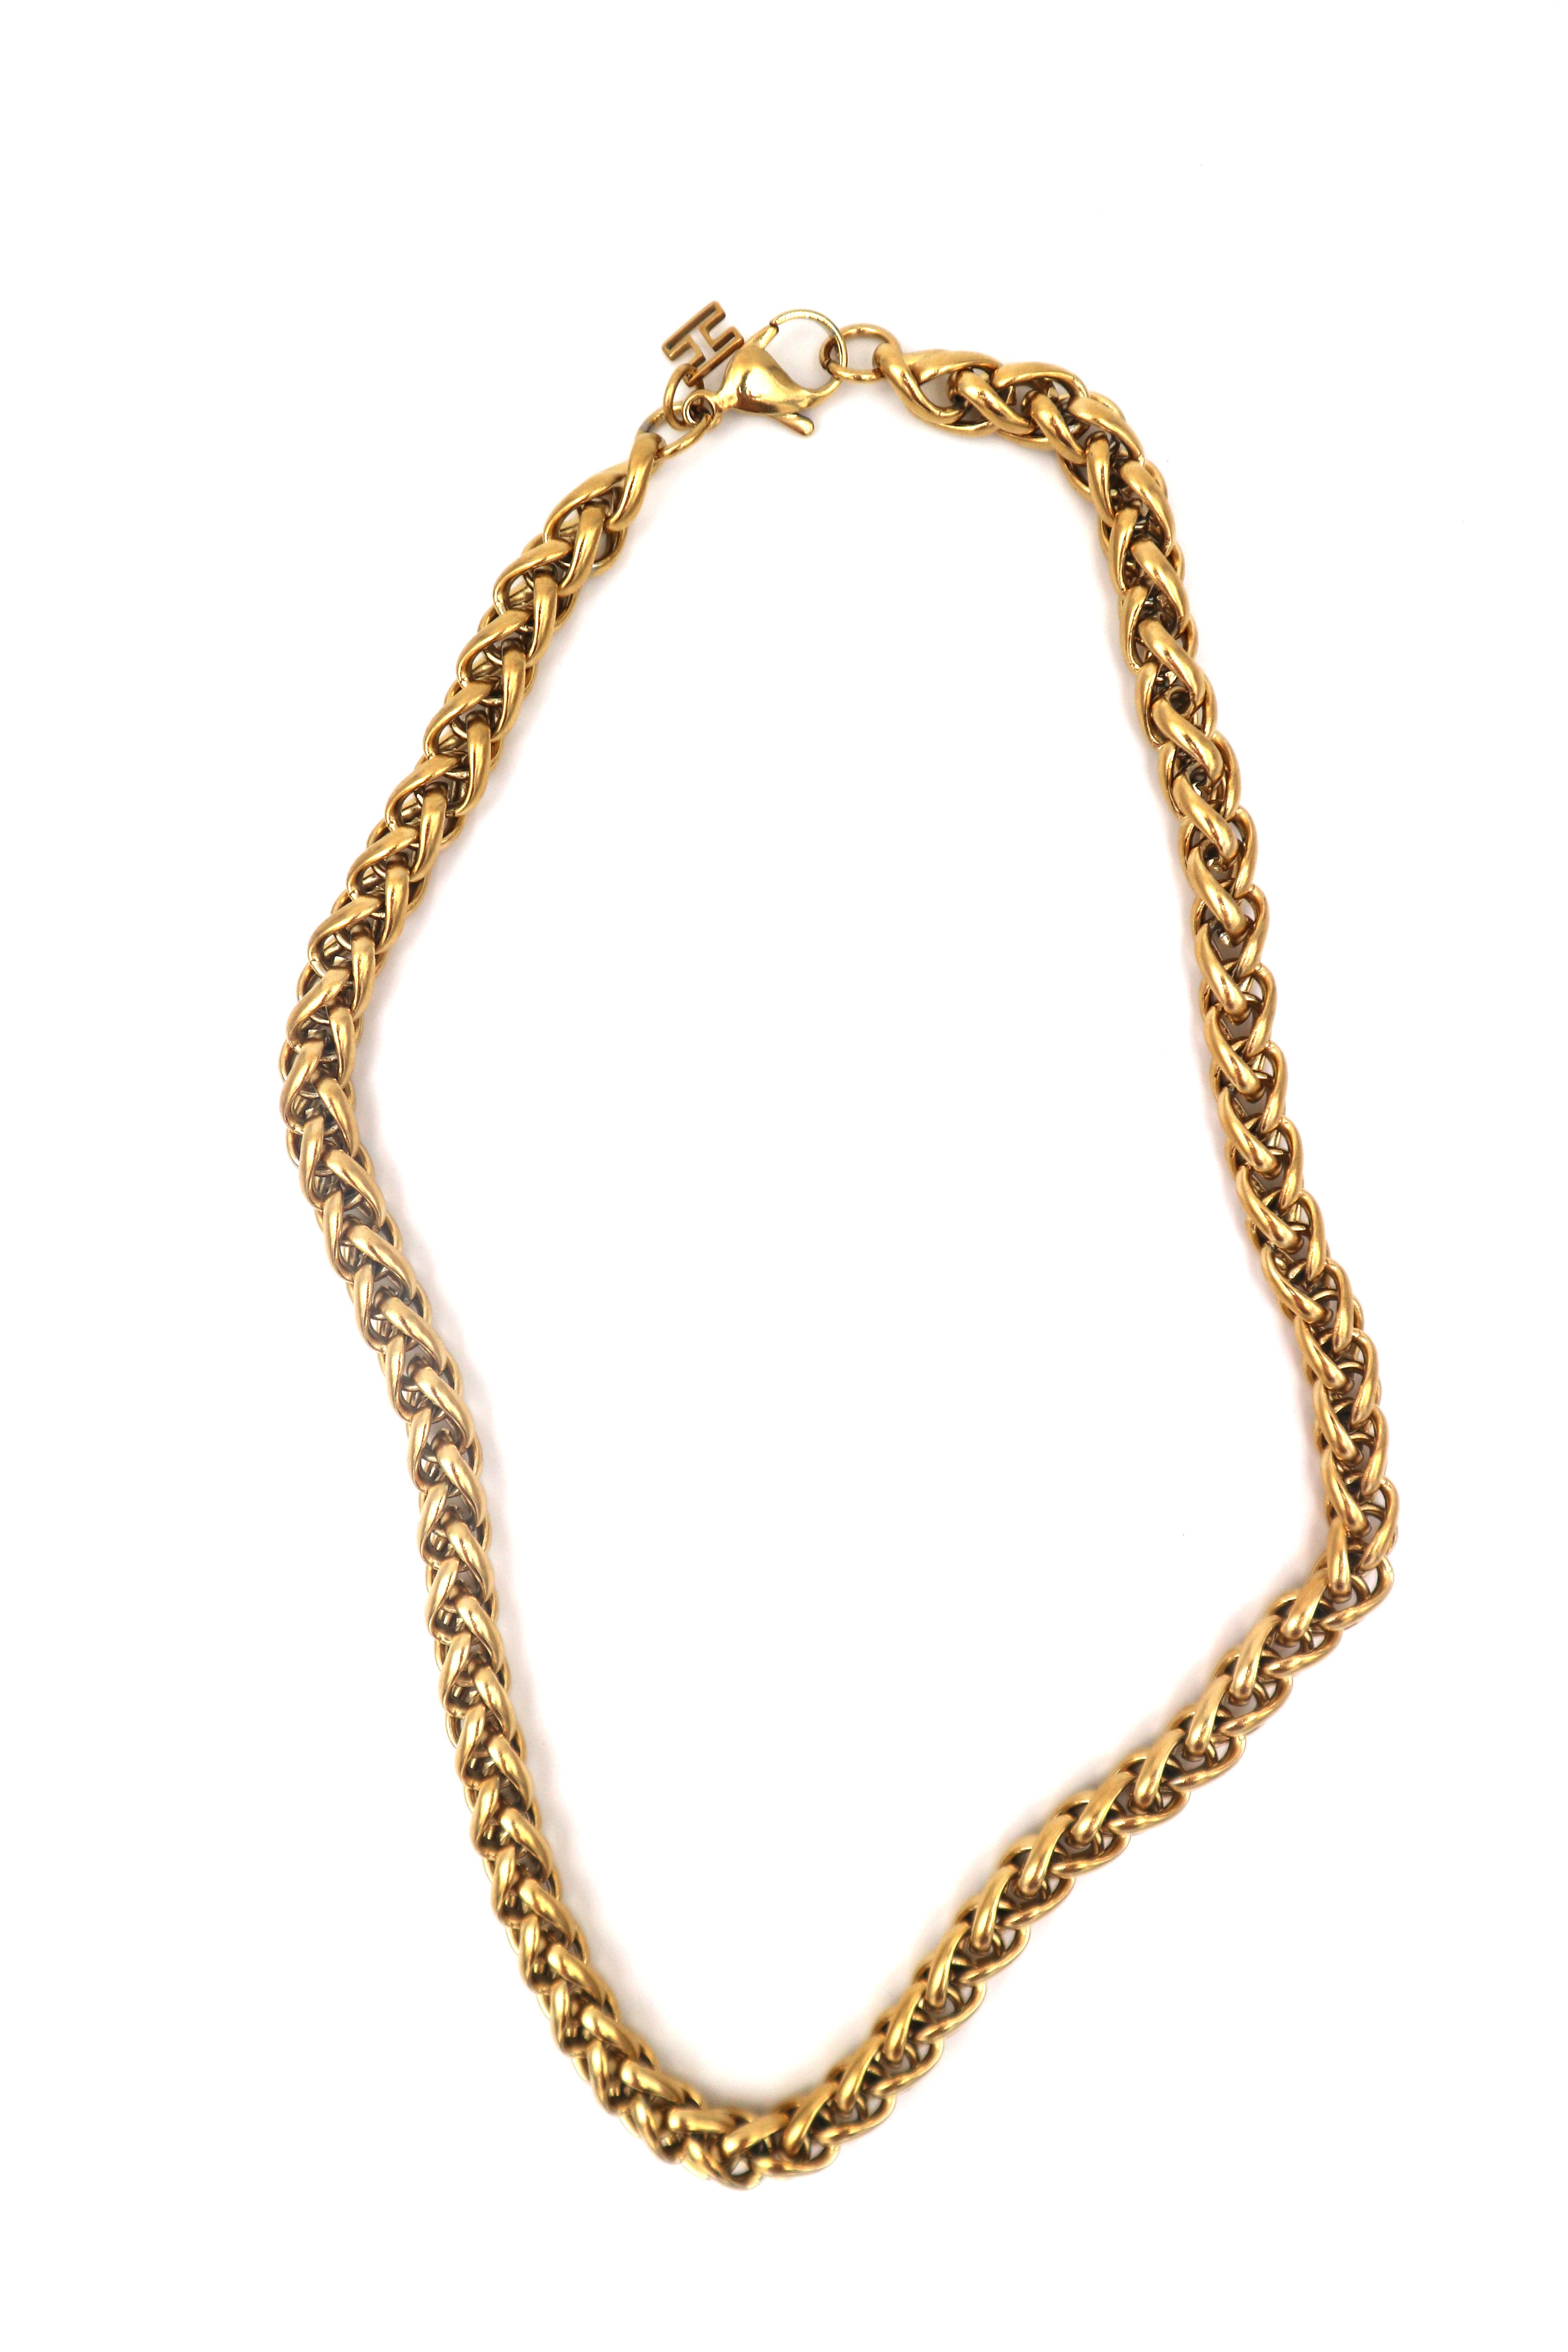 CHRISTY BIG // The vintage chain